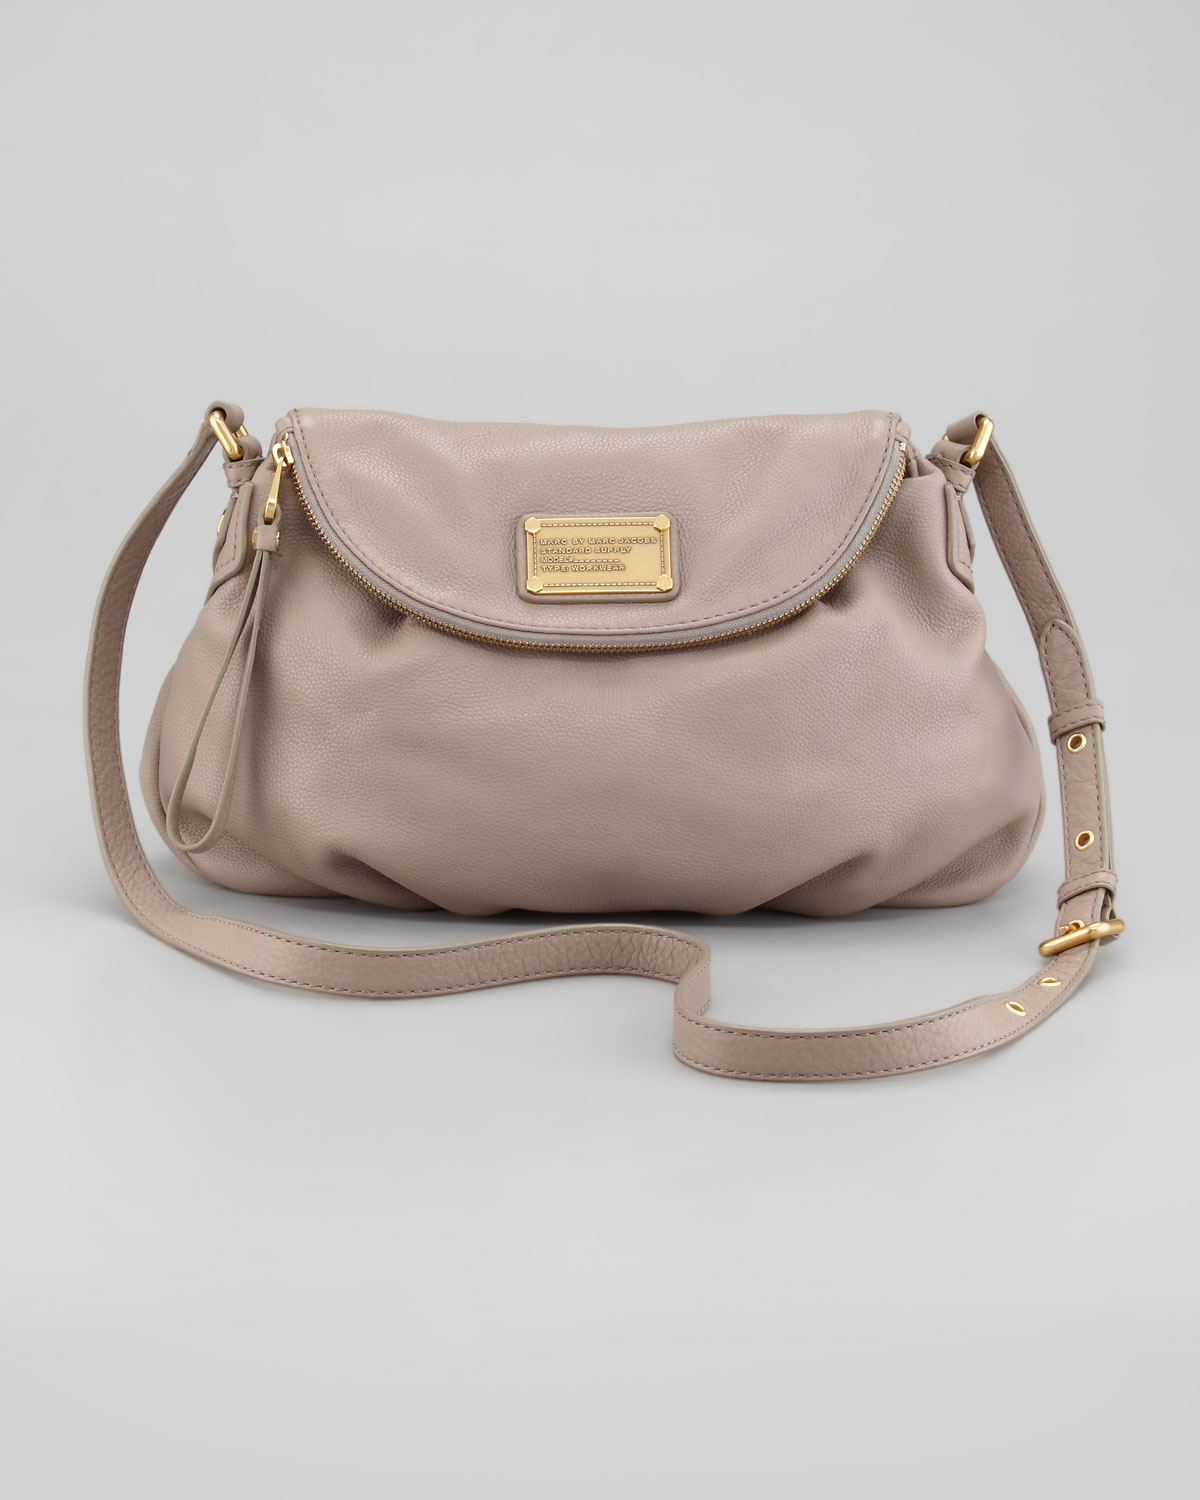 Marc by marc jacobs Classic Q Natasha Crossbody Bag in Beige (cement (taupe)) | Lyst